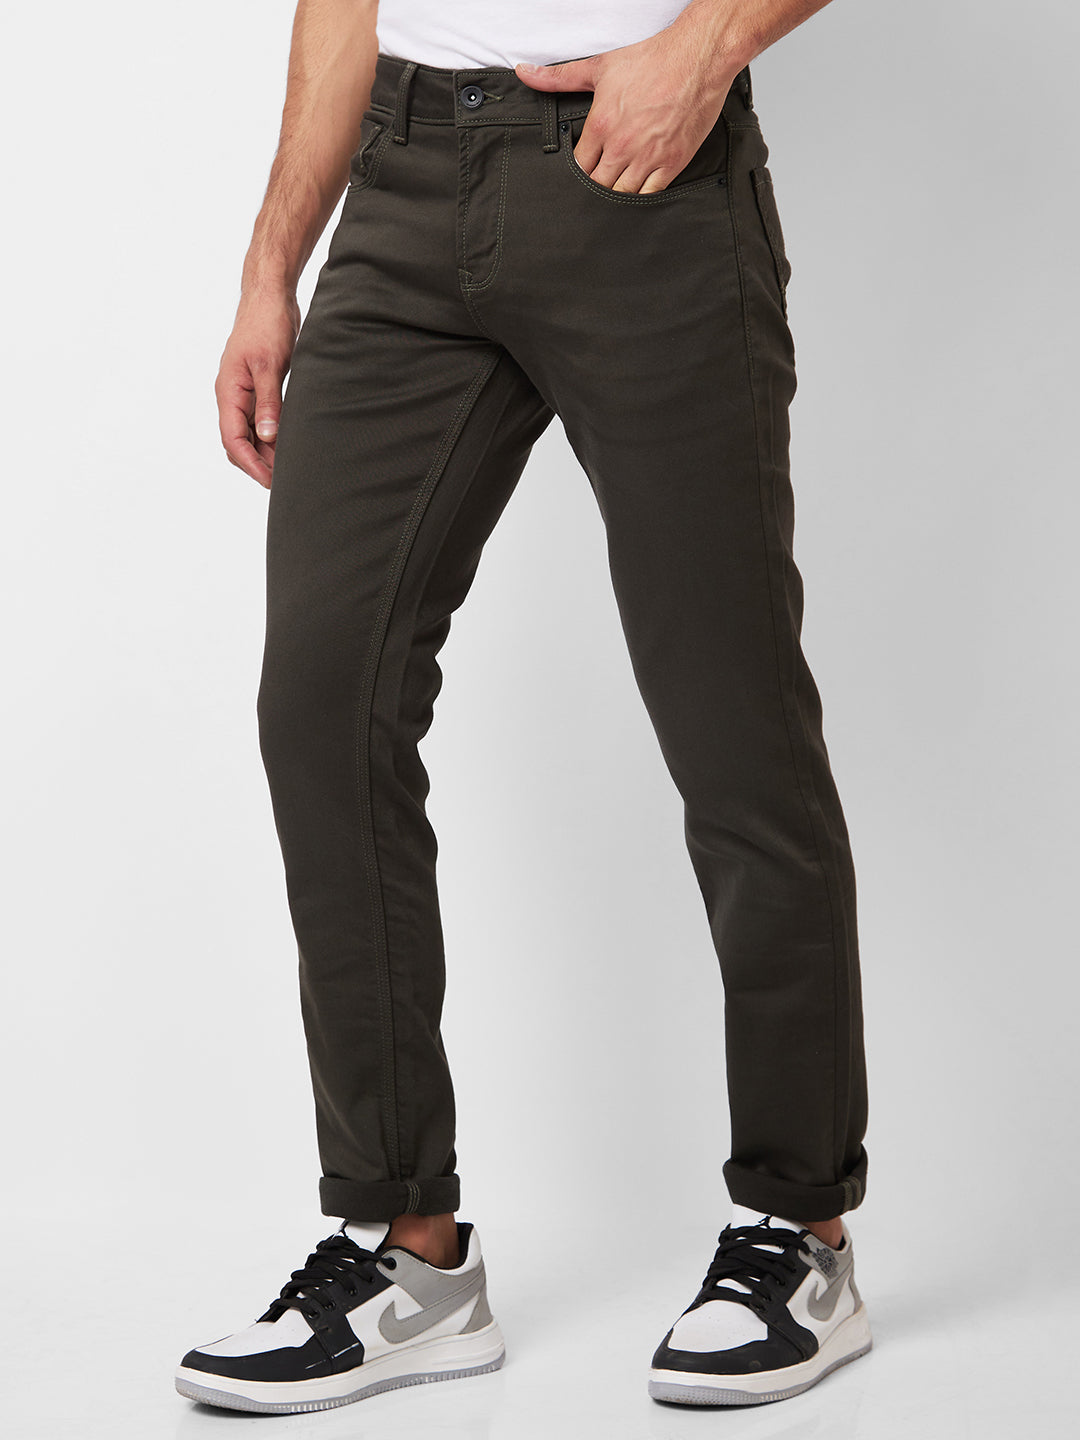 Buy Off-White Trousers & Pants for Men by Arrow Sports Online | Ajio.com